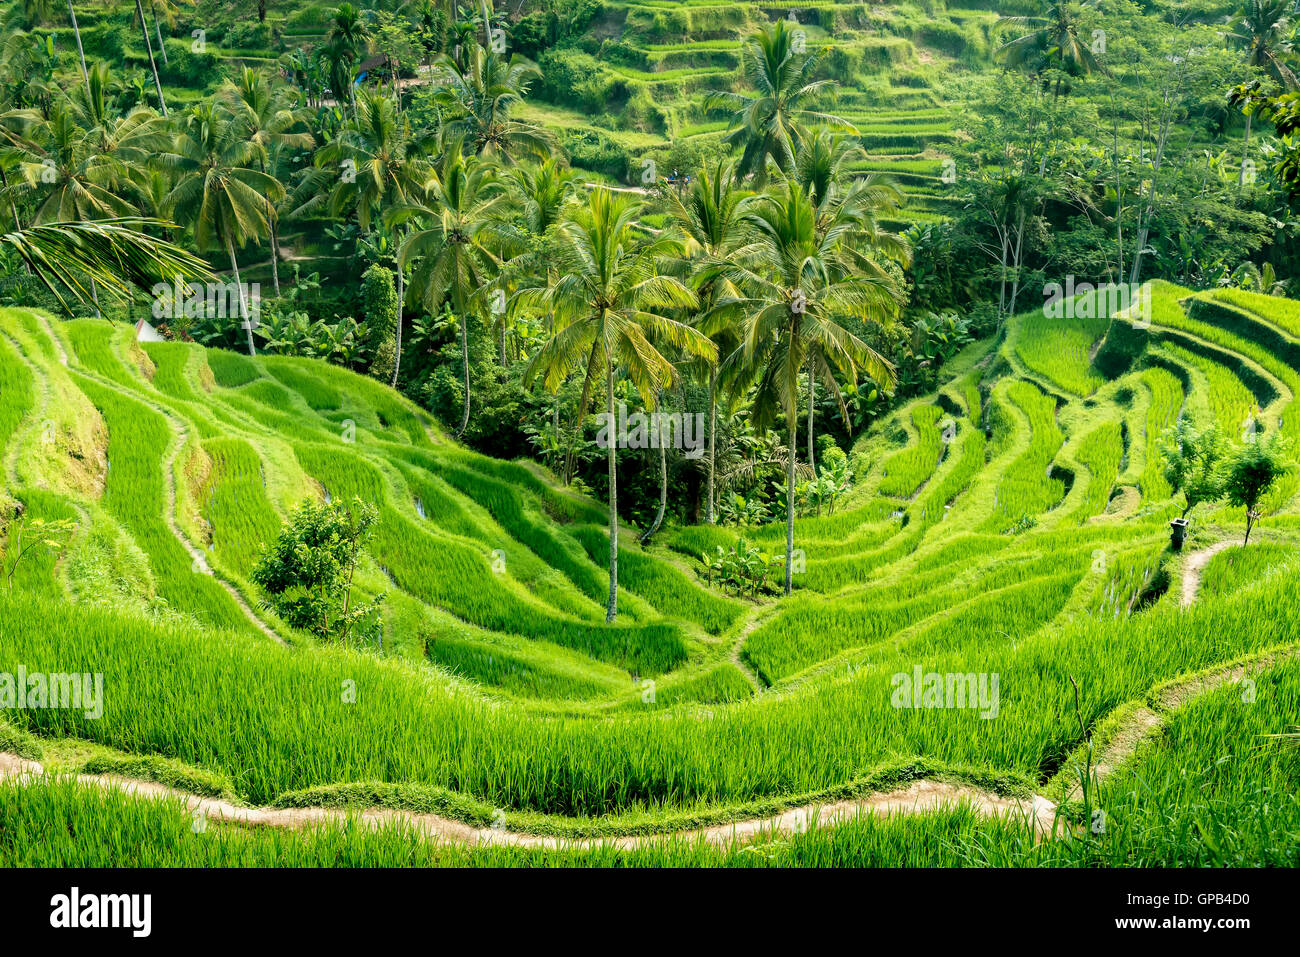 Famous attraction of Ubud - The Tegallalang  Rice Terraces in Bali, Indonesia Stock Photo